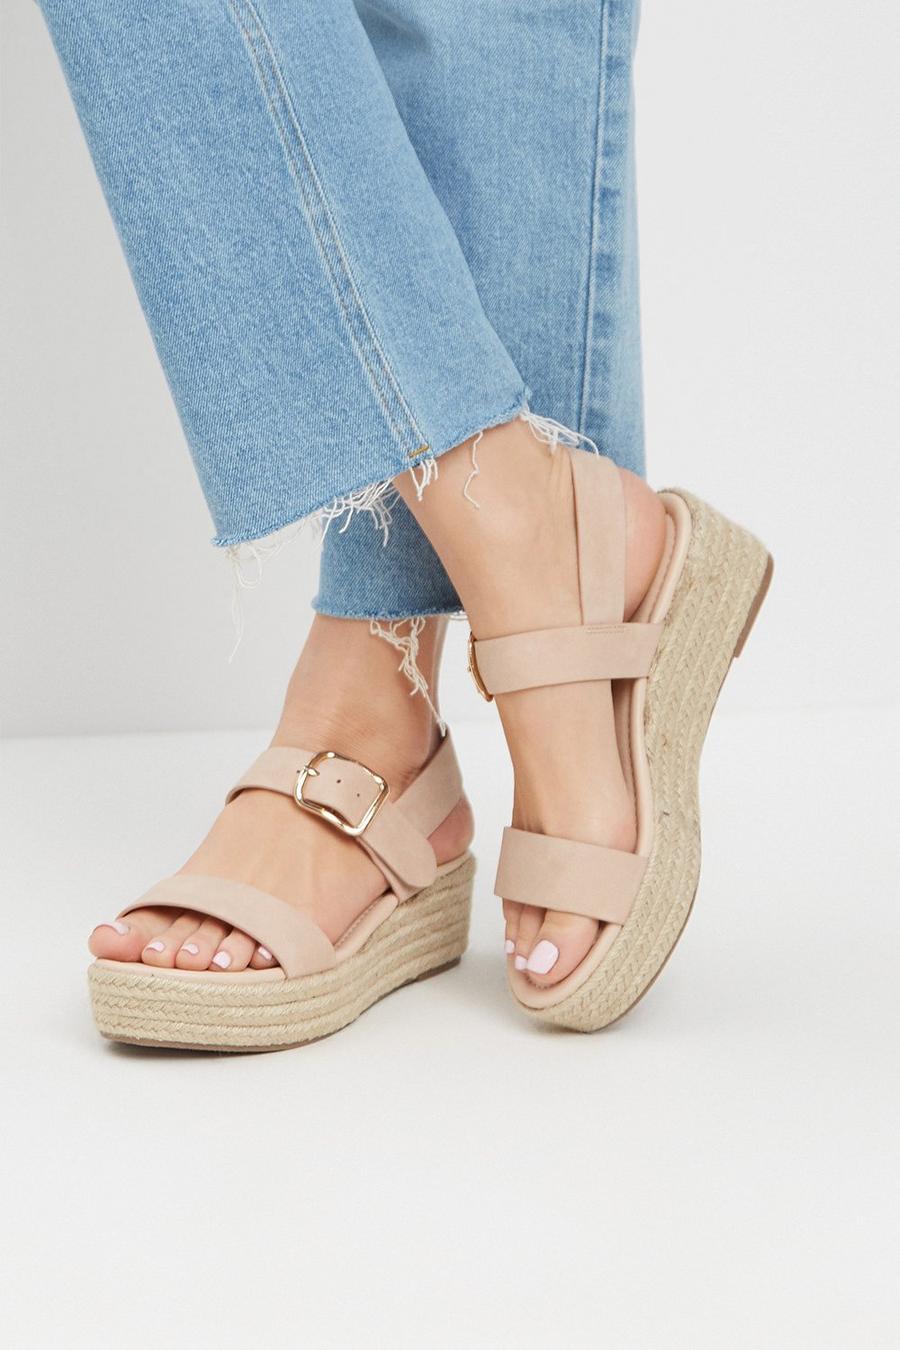 Reign Double Strap Wedge